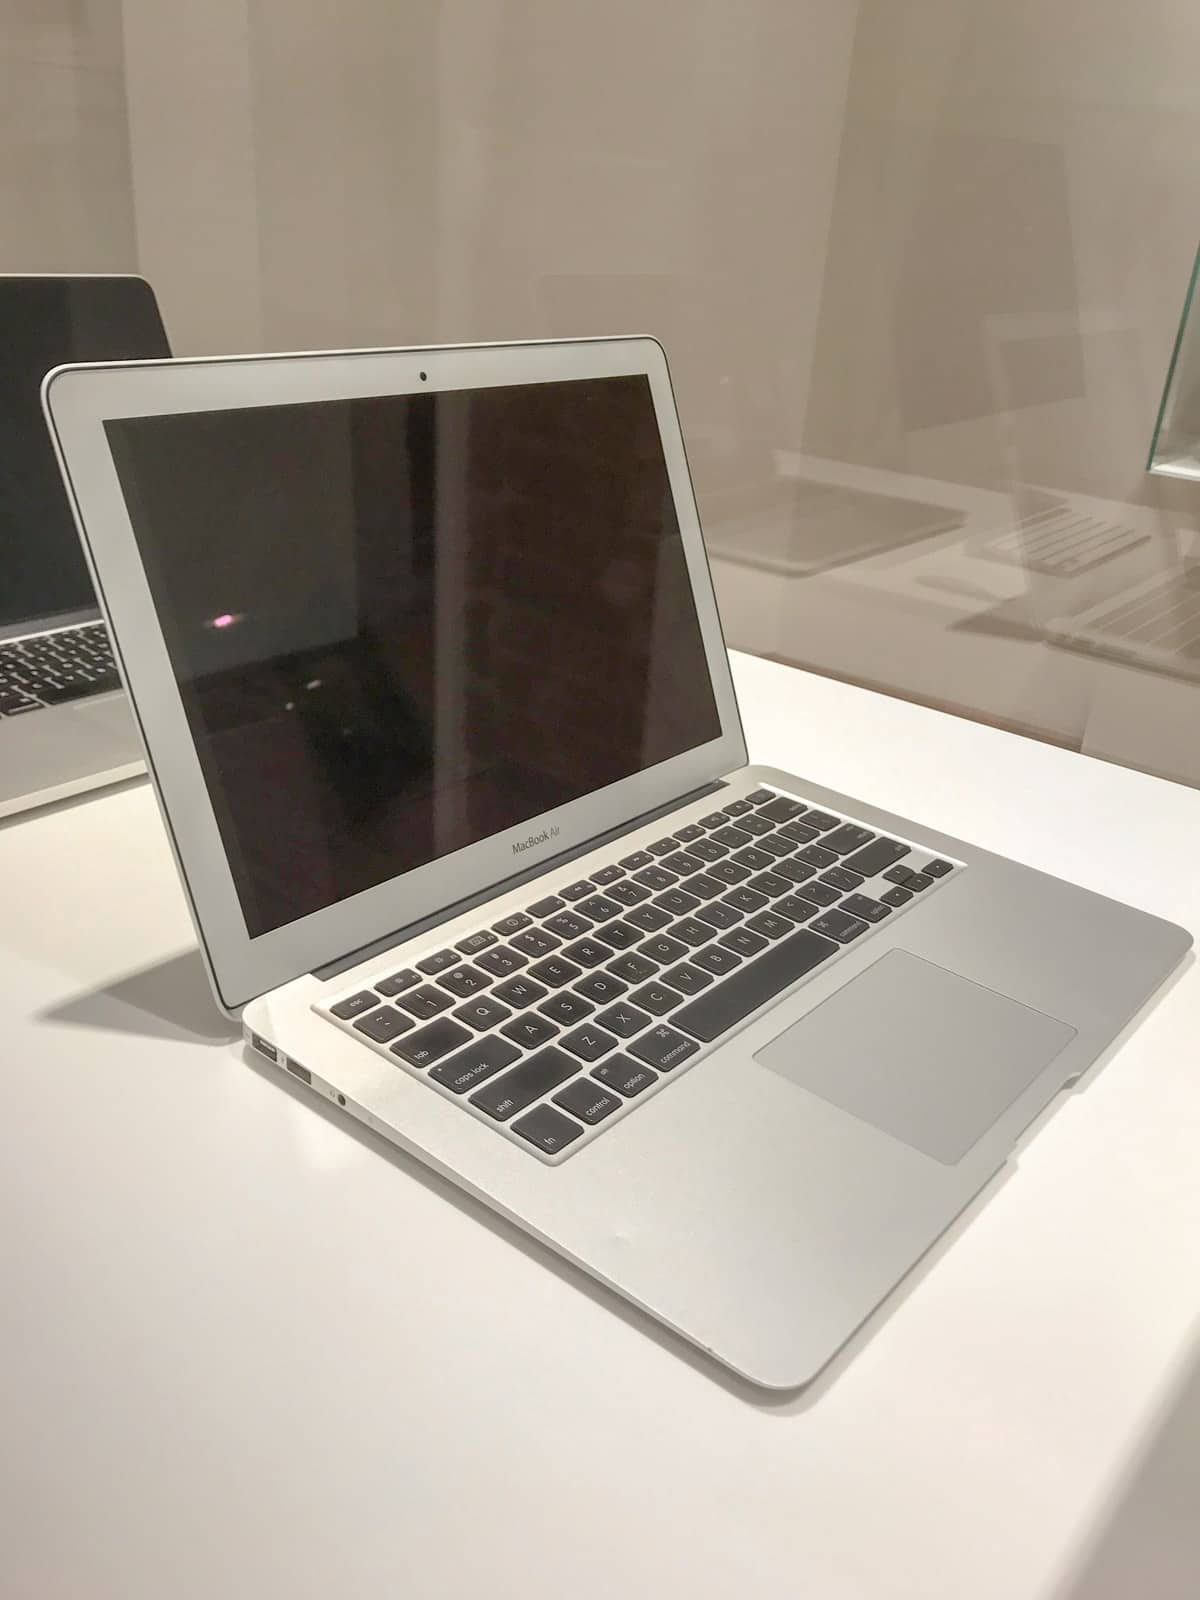 A MacBook Air laptop computer with the screen off , in a glass display cabinet